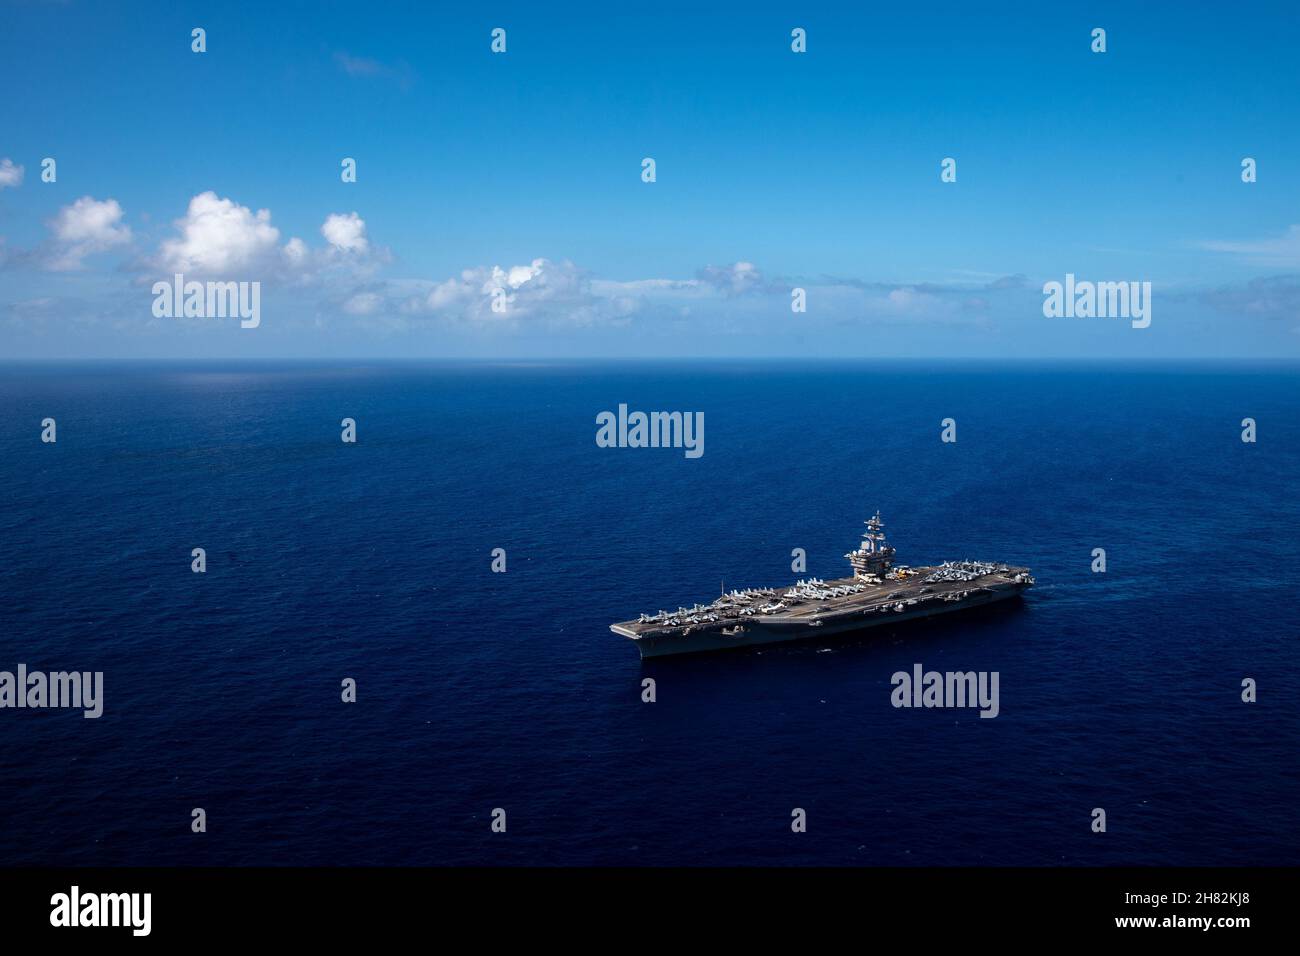 Philippine Sea. 11th Nov, 2021. The Nimitz-class aircraft carrier USS Carl Vinson (CVN 70) transits the Philippine Sea to Guam for a port visit, Nov. 11, 2021. The arrival of the Carl Vinson Carrier Strike Group marks the first time that a carrier strike group with the advanced capabilities of the F-35C Lightning II and Navy CMV-22B Osprey have visited Guam. The Carl Vinson Carrier Strike Group is on a scheduled deployment in the U.S. 7th Fleet area of operations to enhance interoperability through alliances and partnerships while serving as a ready-response force in support of a free and Stock Photo